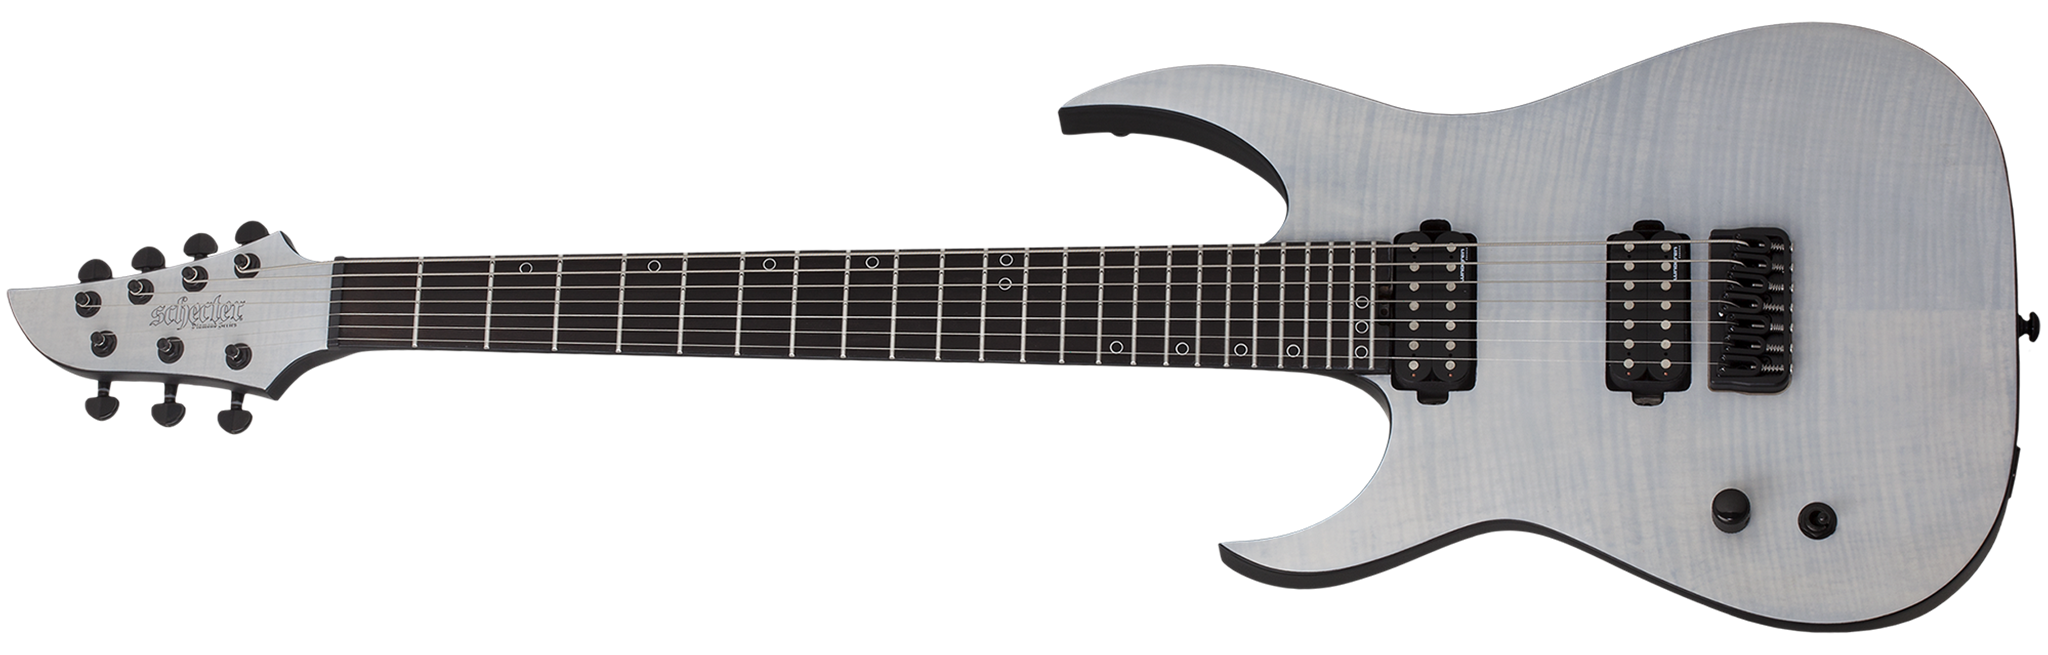 Schecter DIAMOND SERIES  KM-7 MK-III Legacy Transparent White Satin Left Handed  7-String Electric Guitar 2023